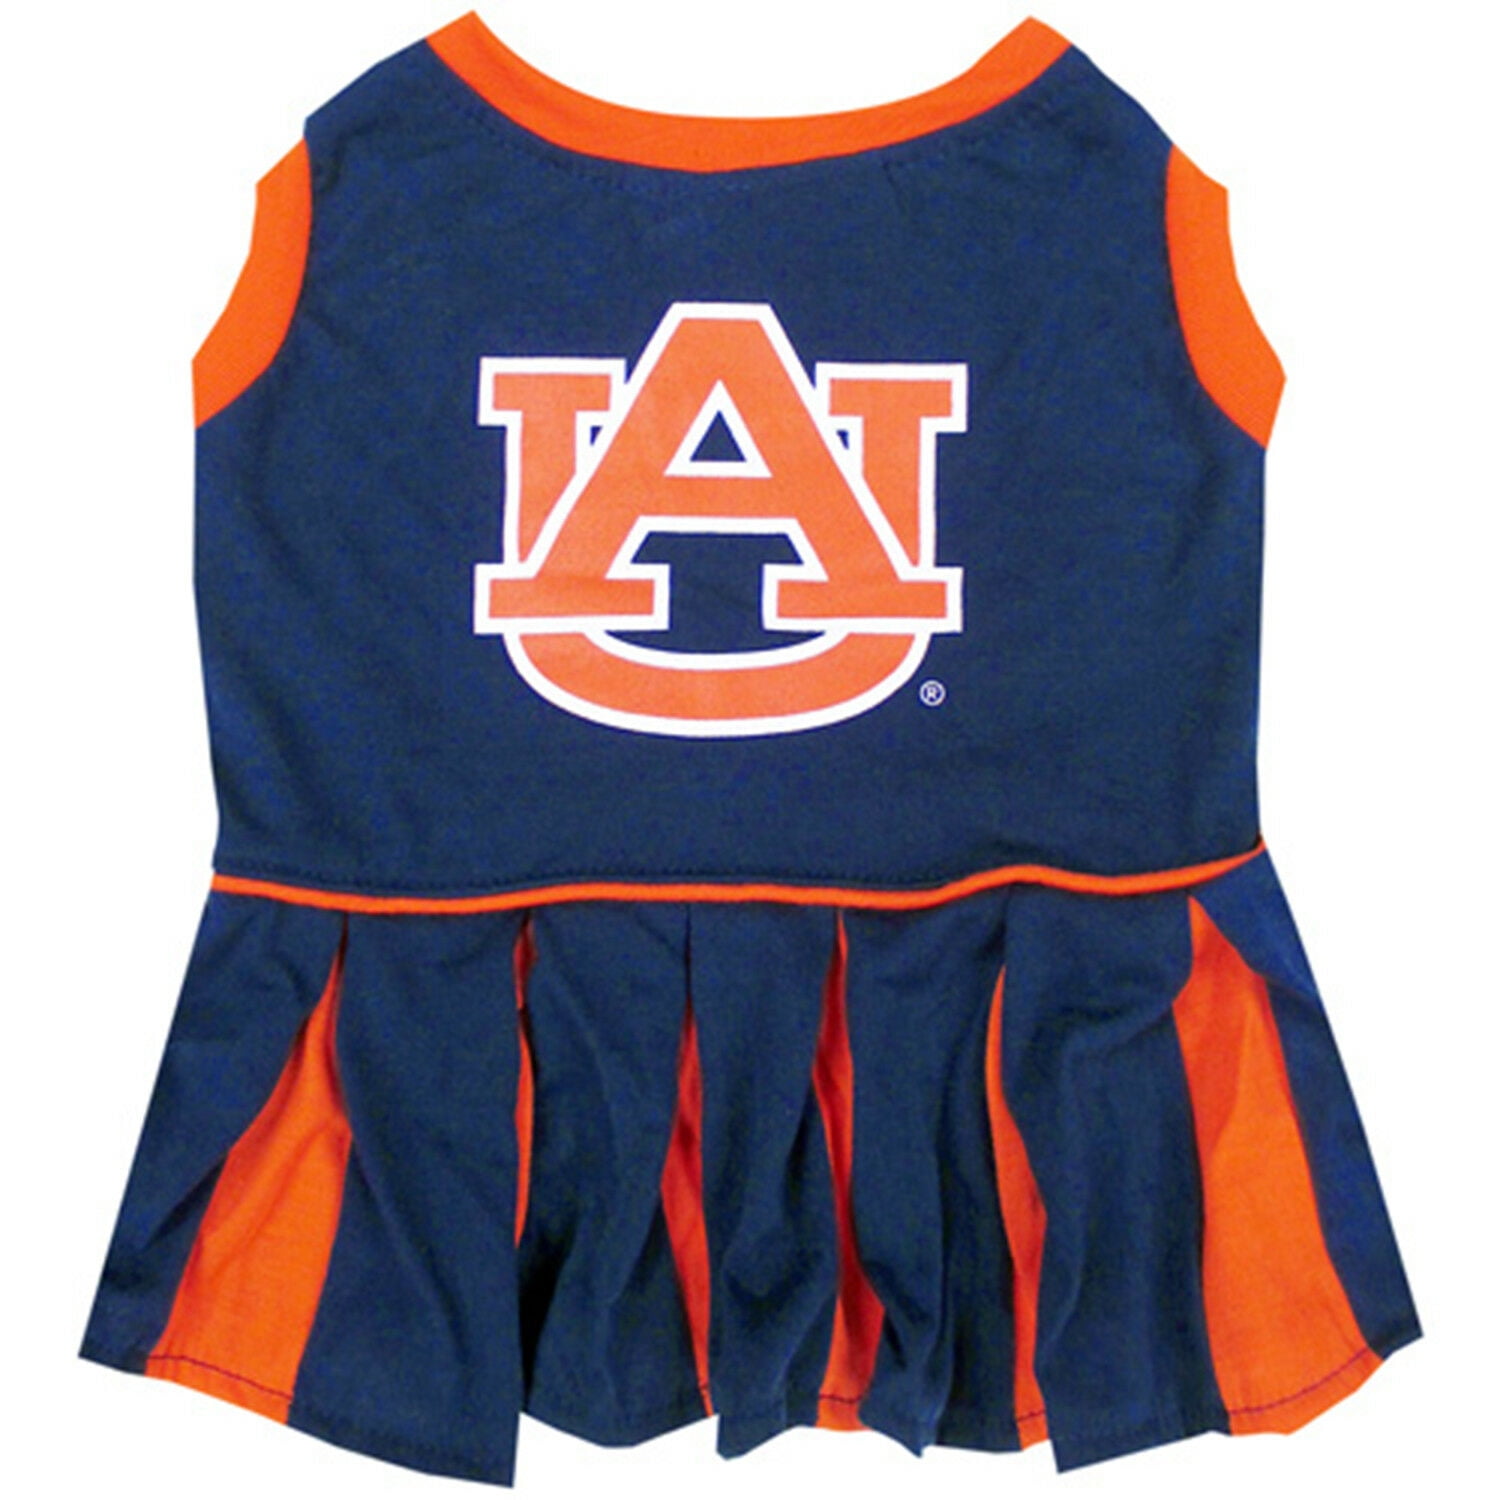 Auburn University Tigers Toddler and Youth 3-Piece Cheerleader Dress 